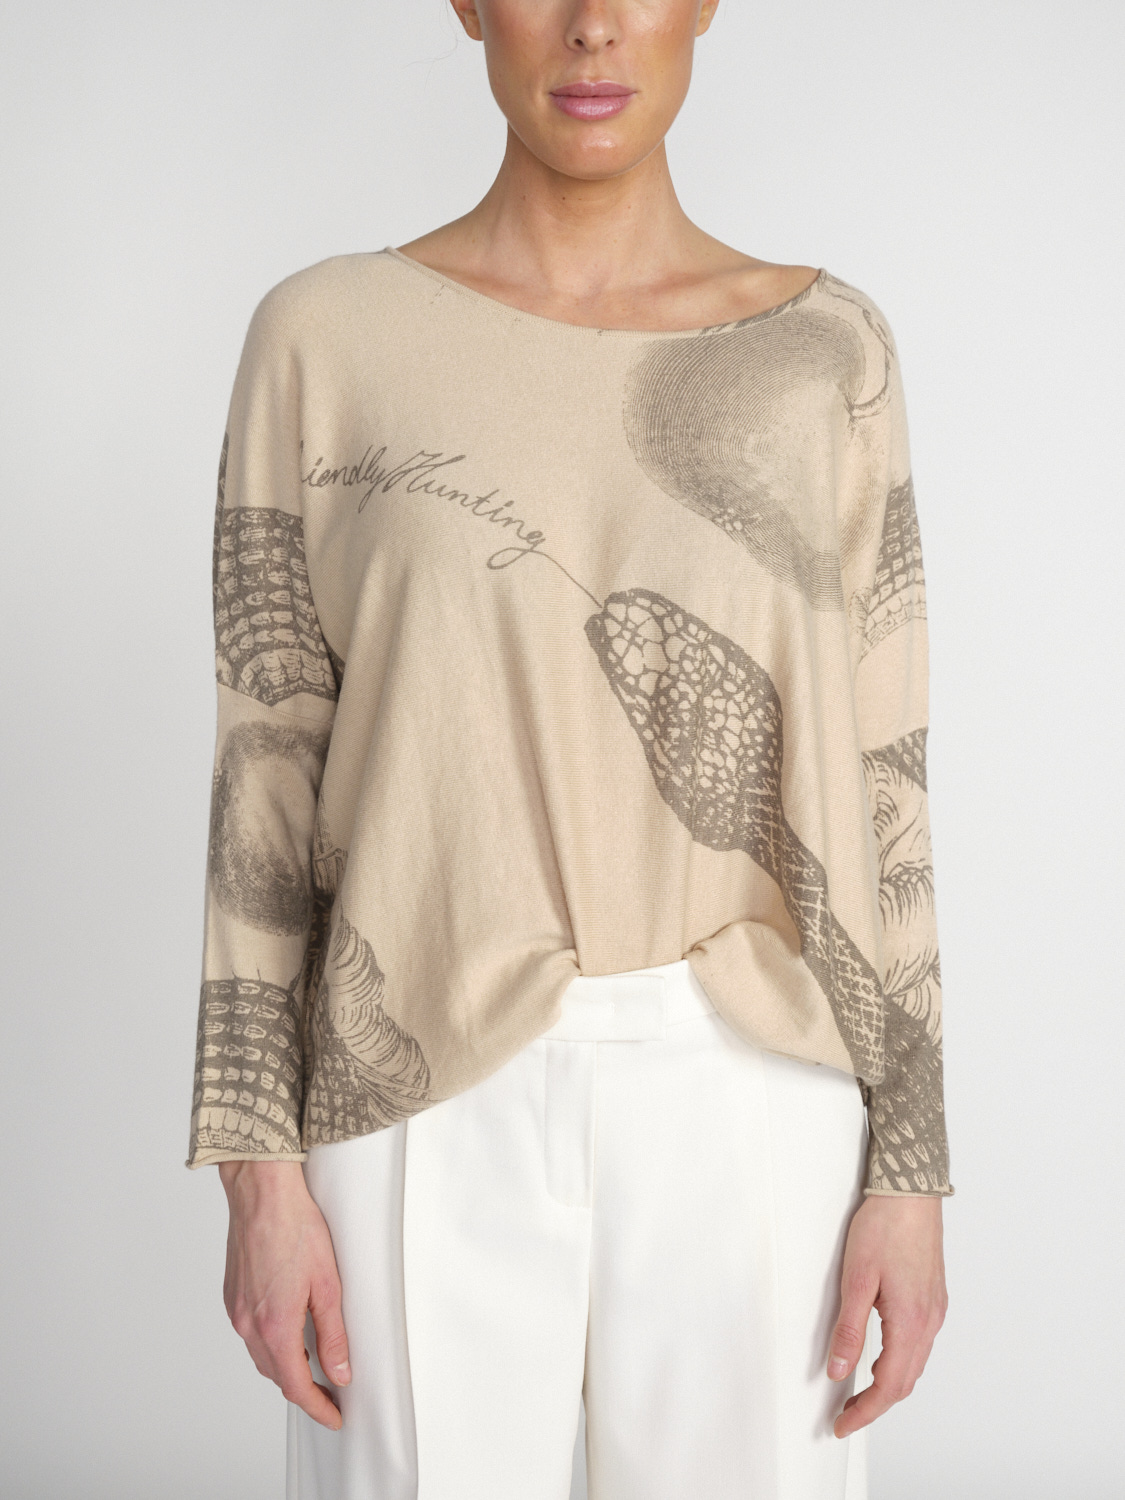 friendly hunting Imara Brighton - Lightweight sweater made from a cotton-cashmere blend  beige XS